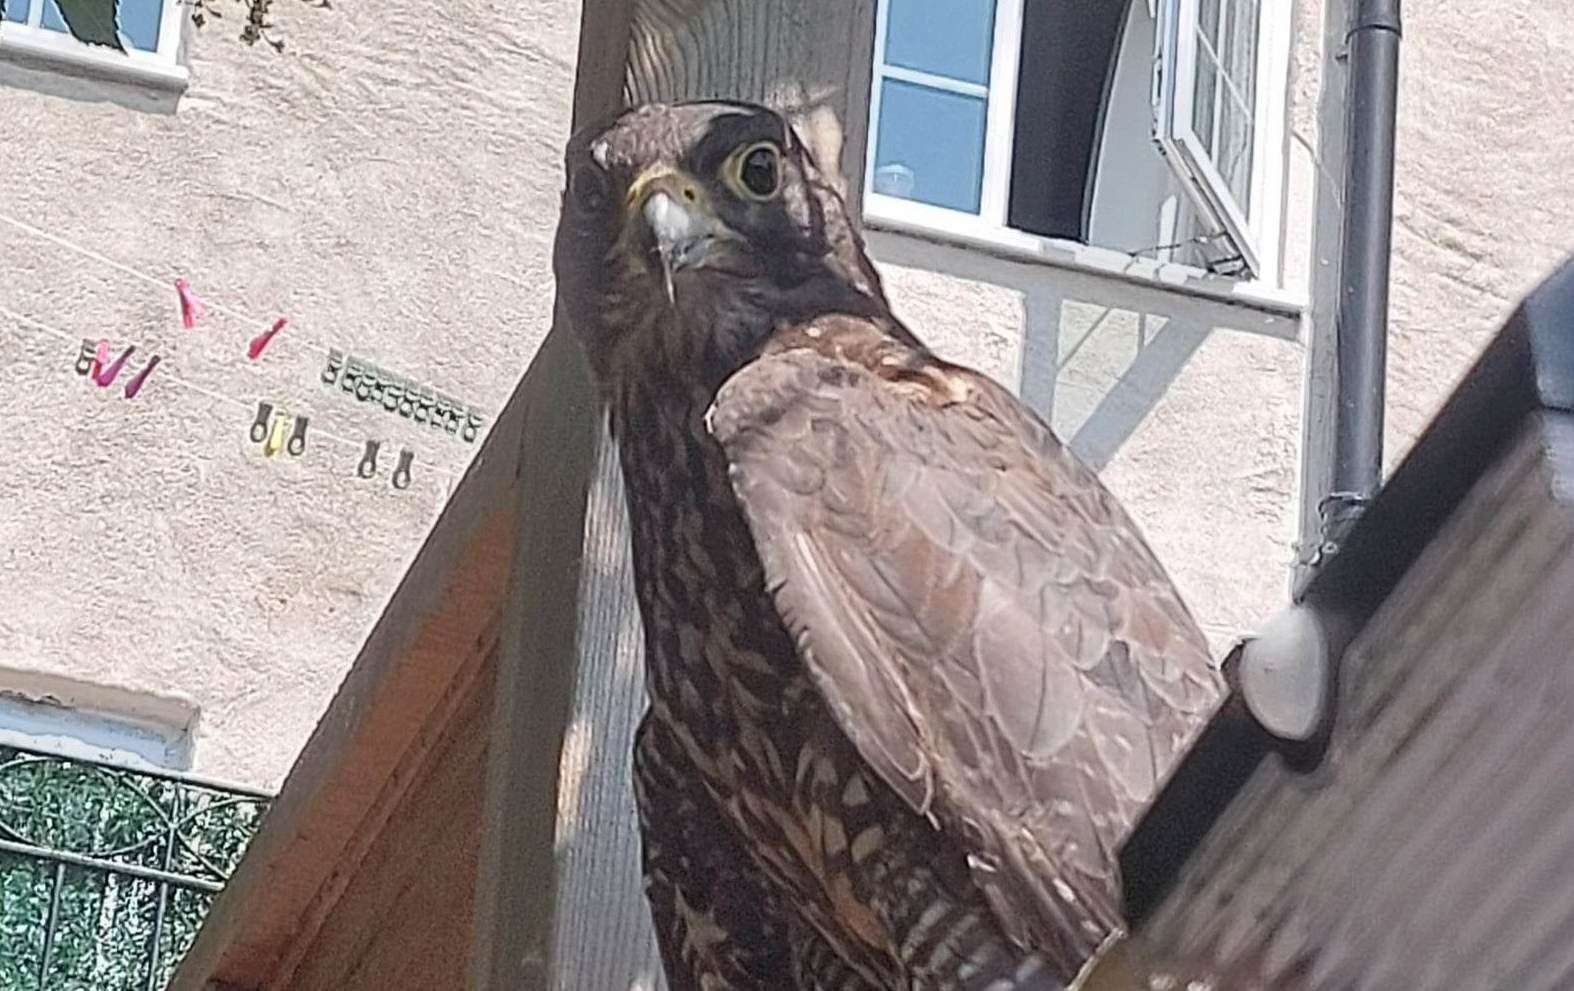 A second falcon was rescued in Chatham after it was found sitting on a garden fence